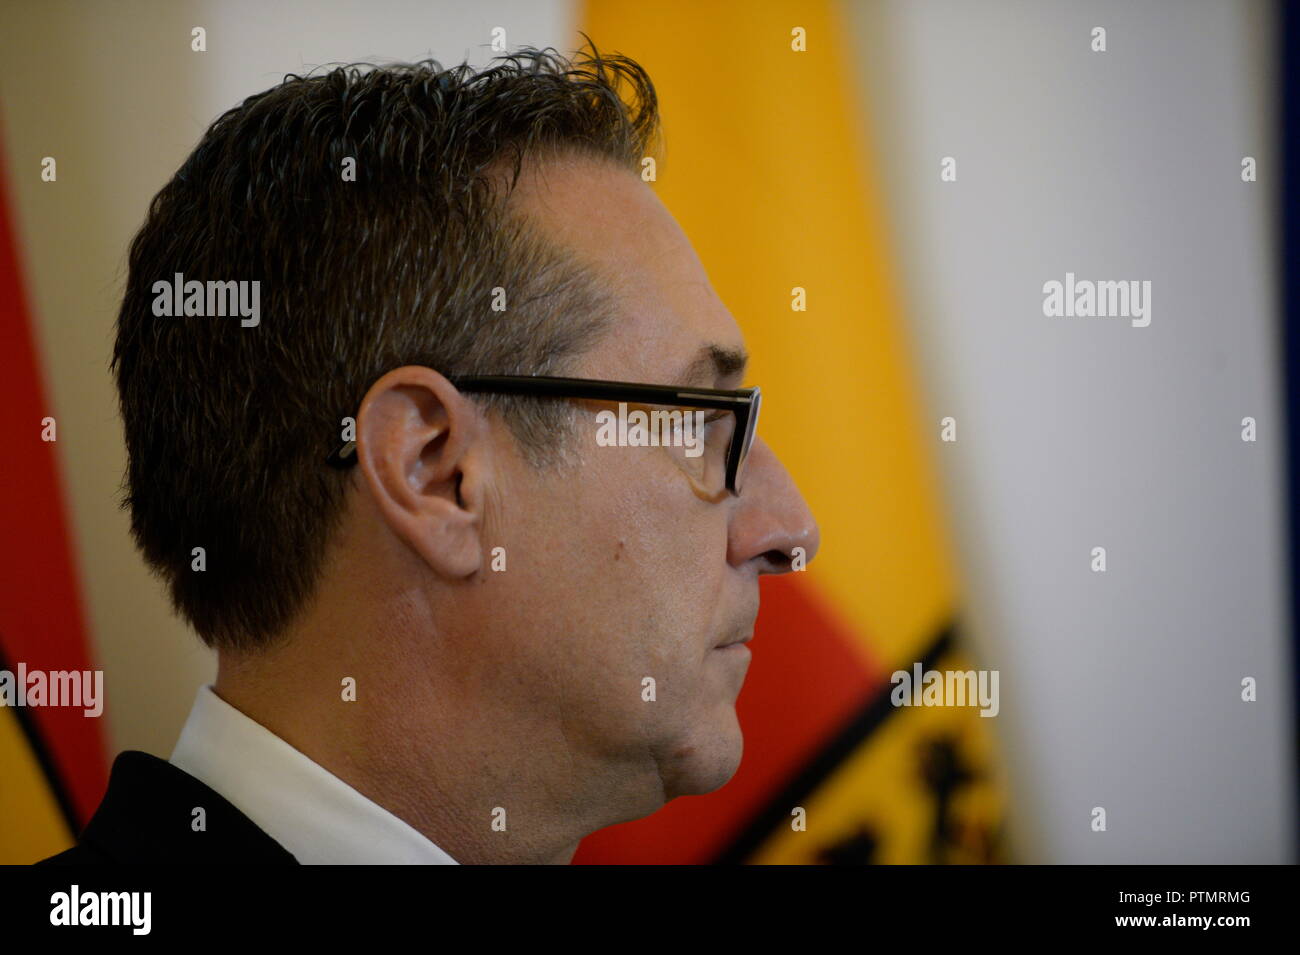 Vienna, Austria. October 10, 2018. Council of Ministers in the Federal Chancellery with the topics of pension adjustment, Gottfried Haber appointment as Fiscal Council President, competence resolution. Picture shows Vice-Chancellor Heinz Christian Strache.  Credit: Franz Perc / Alamy Live News Stock Photo